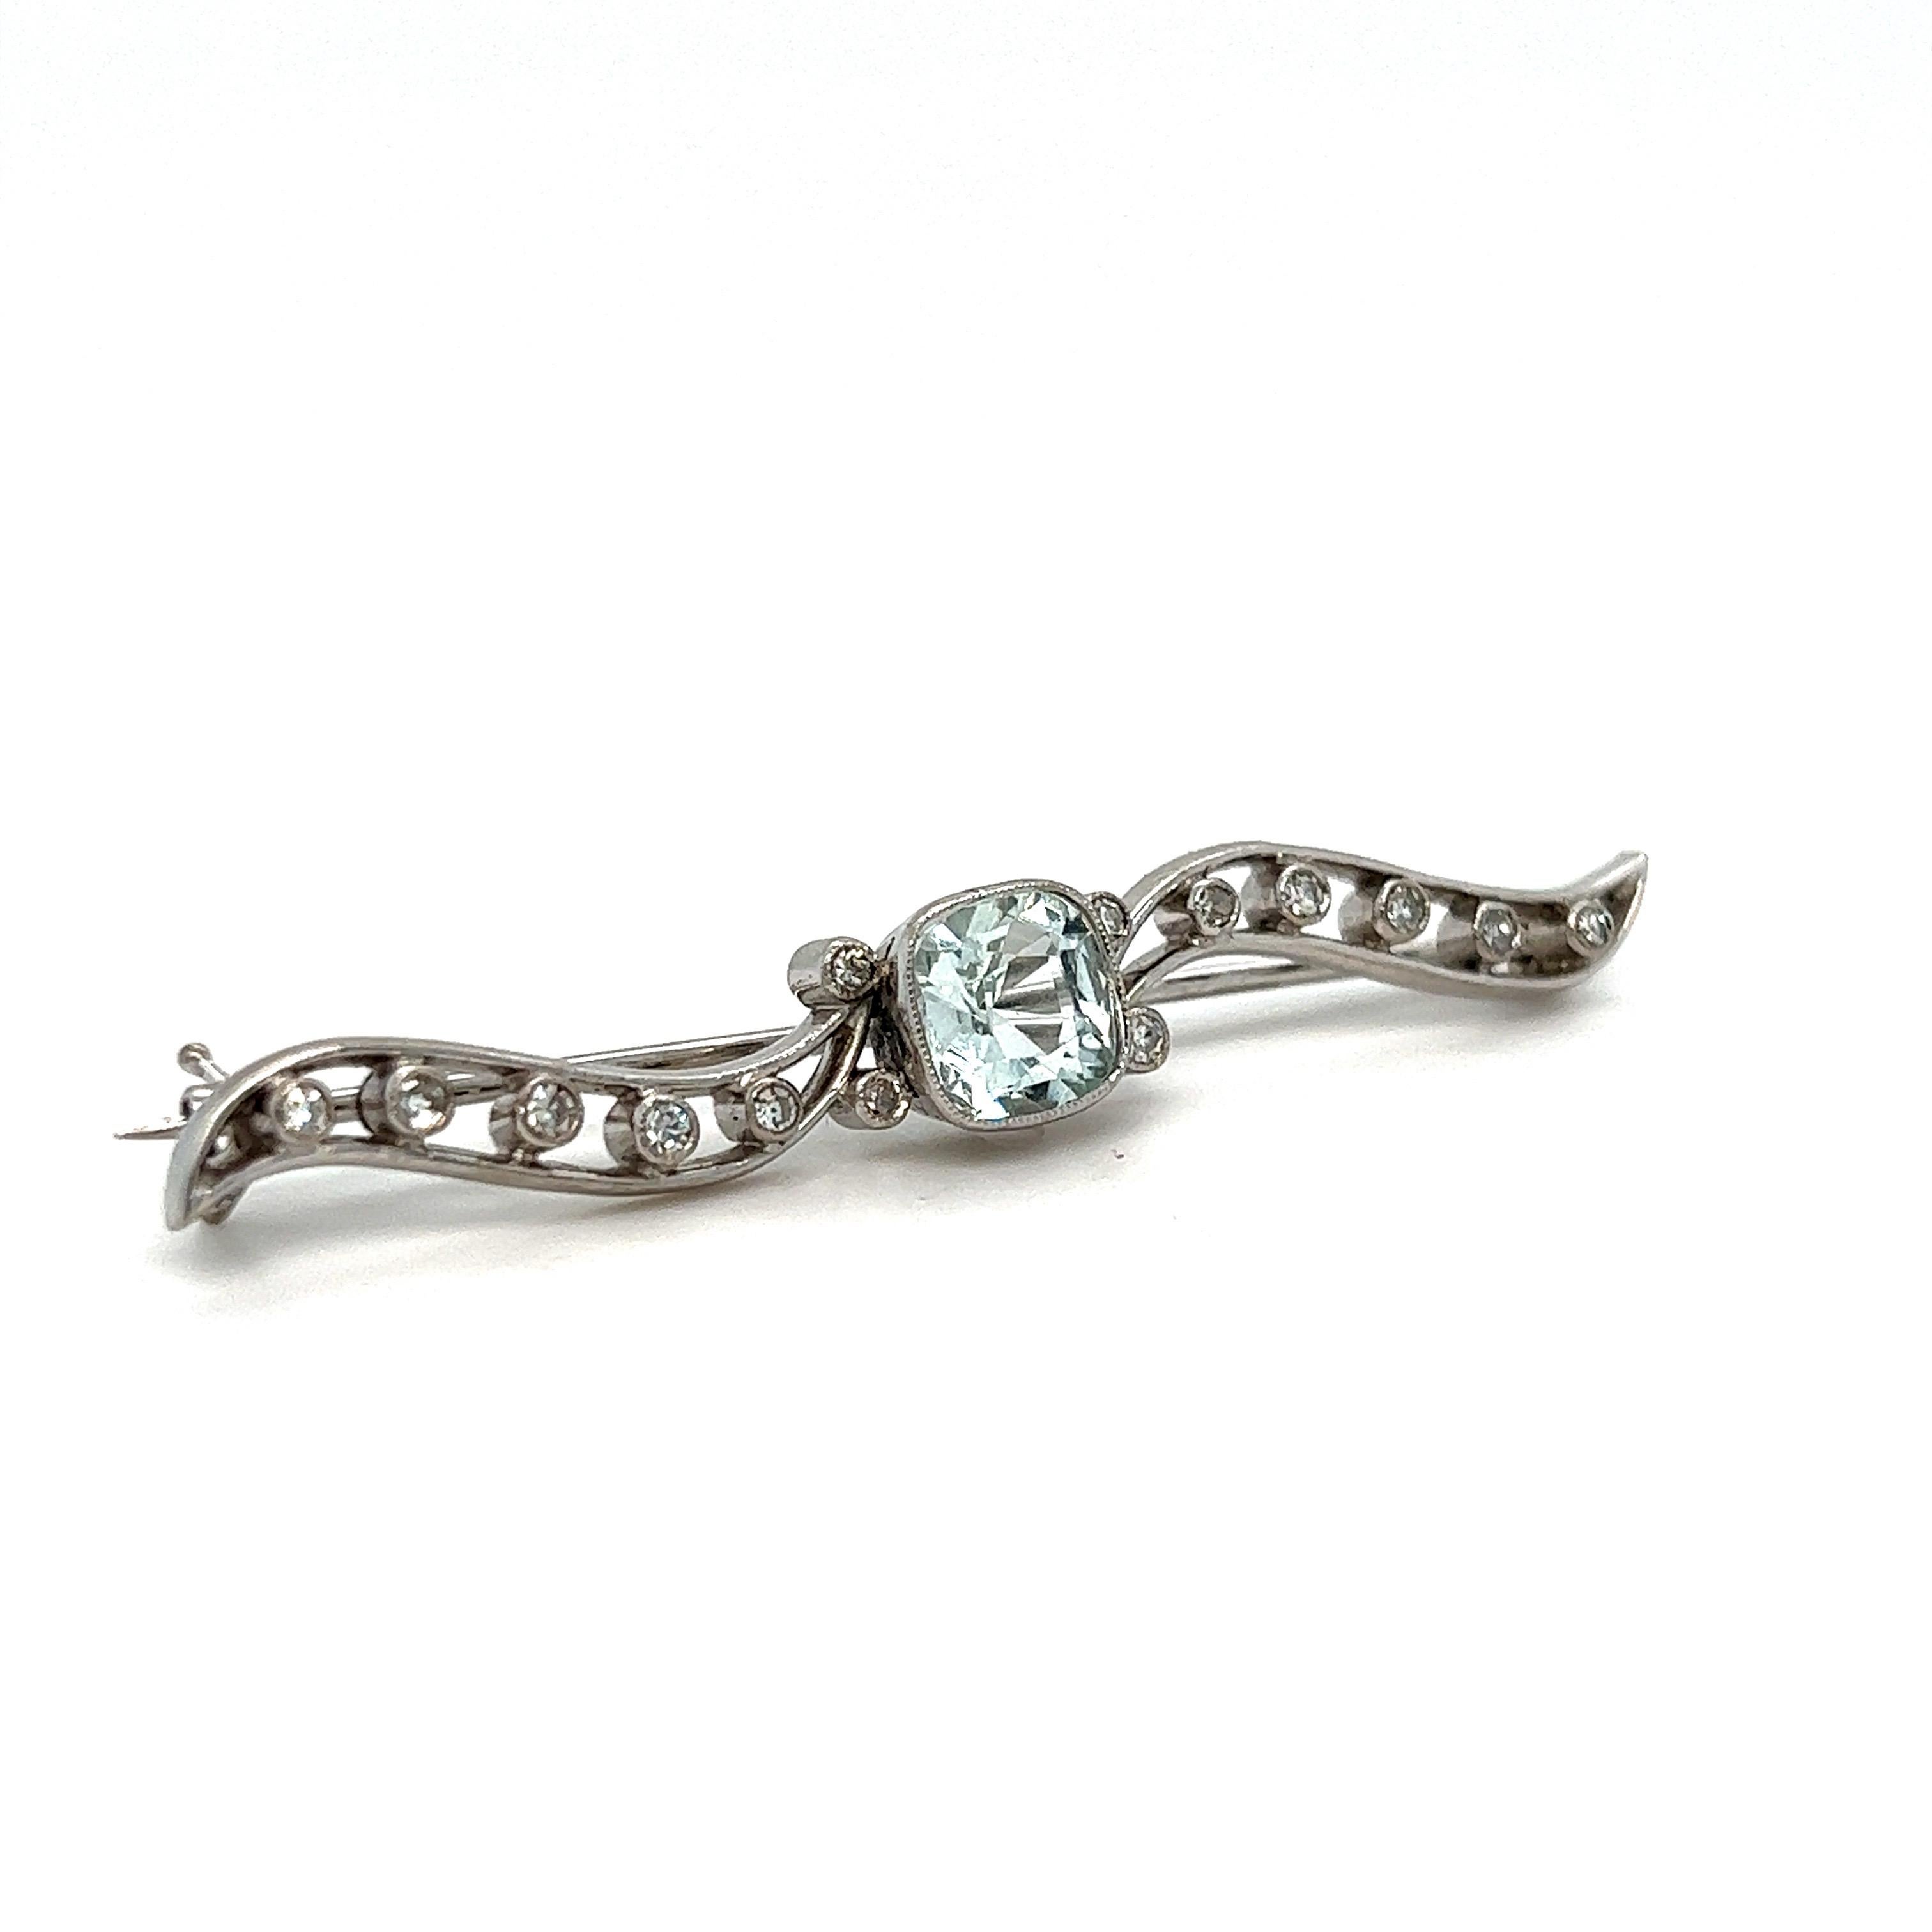 LOVE!  - this Vintage Swedish 18K White Gold Diamond and Aquamarine Wave Pin/ Brooch is definitely a favorite of mine! I was convinced I was going to convert into a necklace, but figured I'd leave it to the buyer, and sell the piece as the pin it